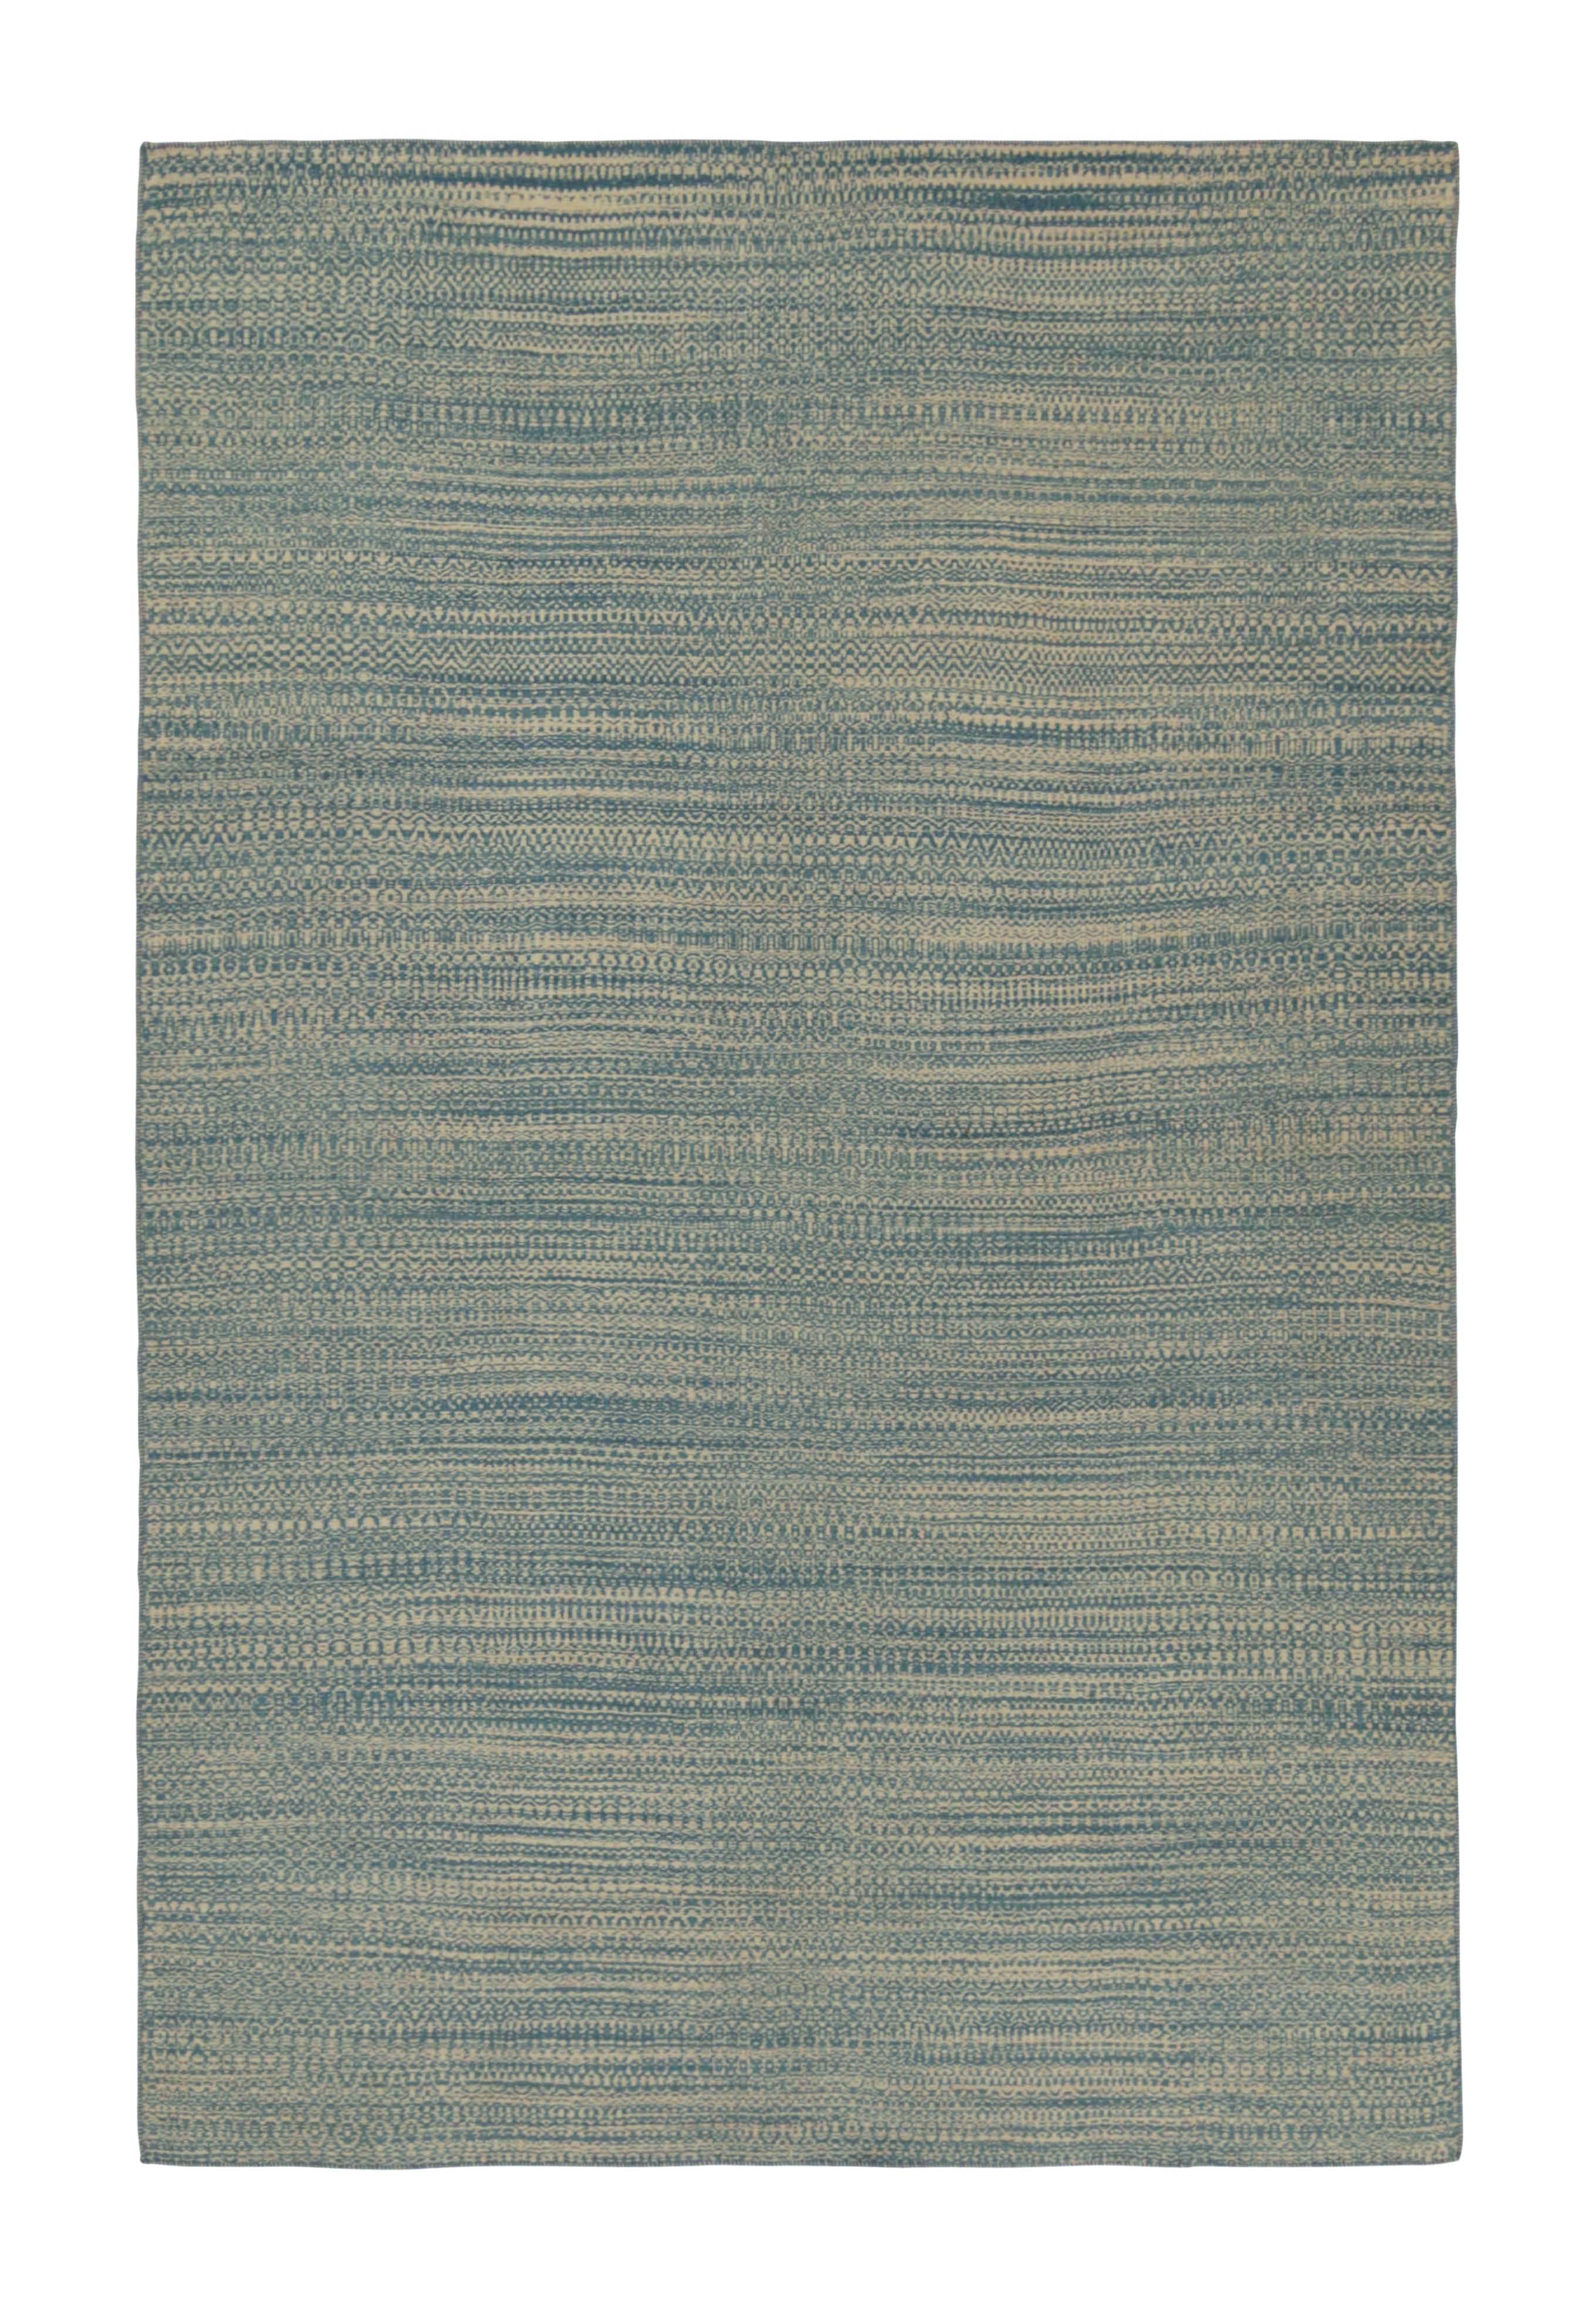 Rug & Kilim’s Contemporary Persian Kilim in Blue and Beige Stripes